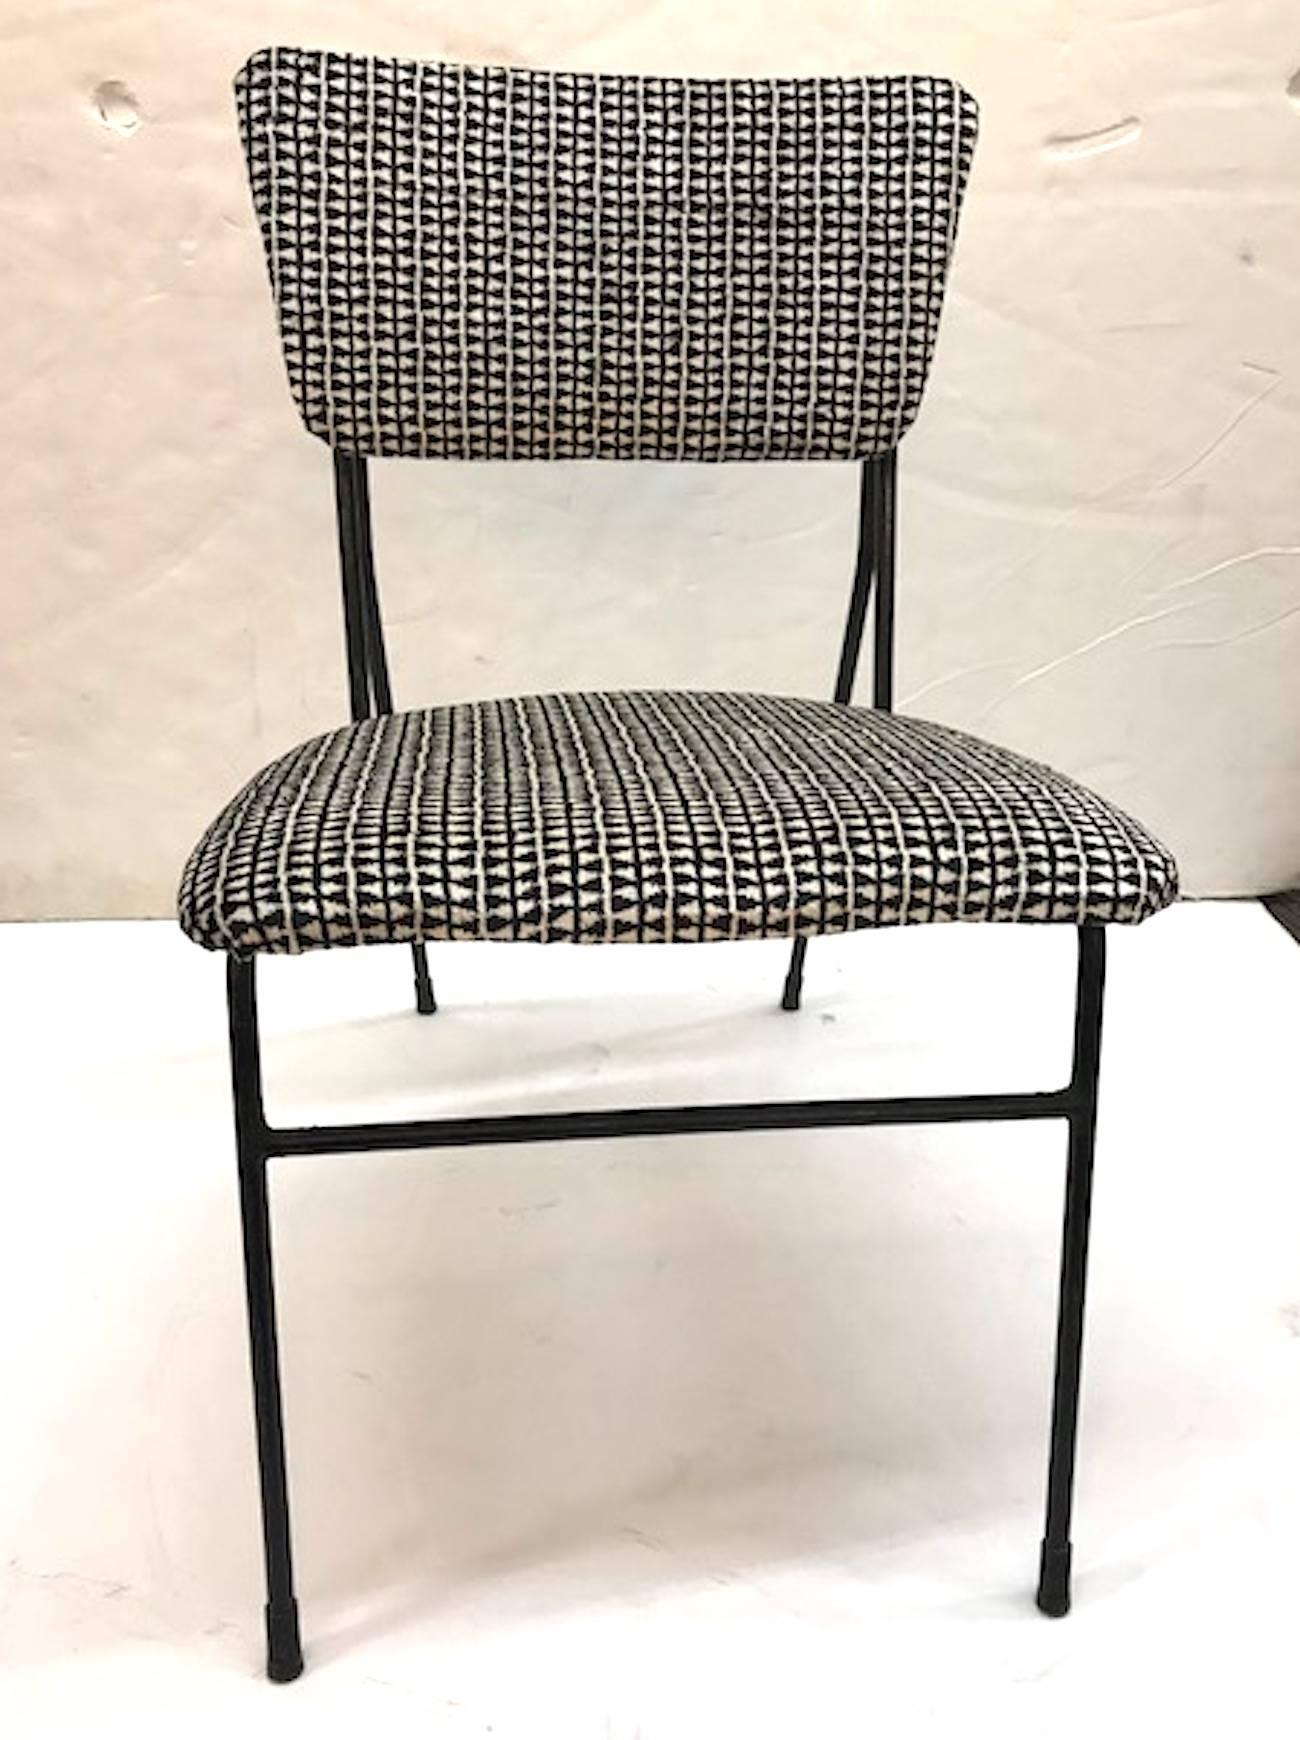 Italian 1950s modern arm side chair newly upholstered in black and white Italian velvet fabric. Original black finish on iron with light wear and distressing. Chair measures: 17.5